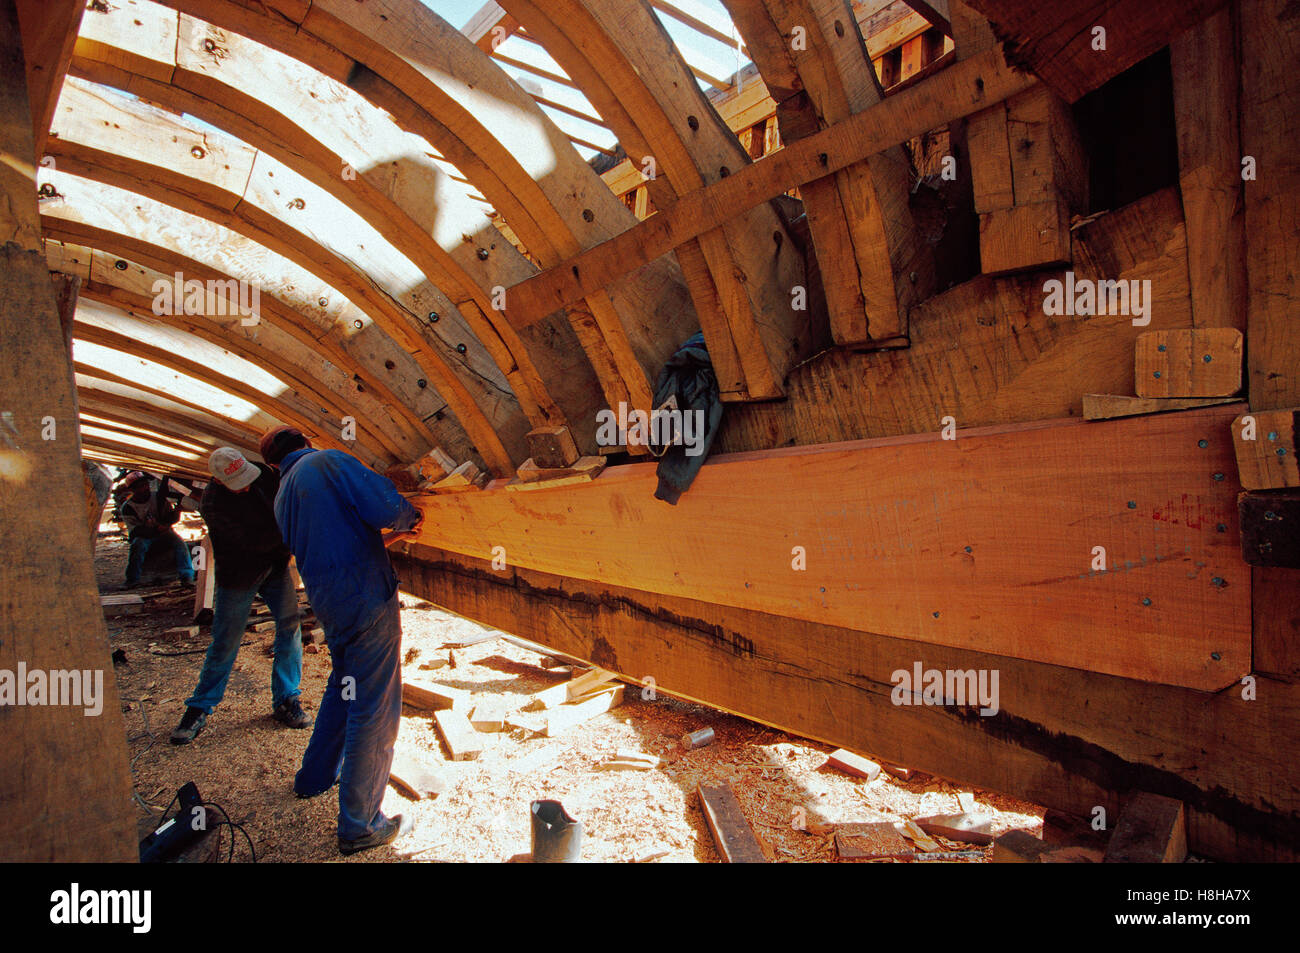 Shipwright under the hull of a trawler in the shipyard of Essaouira, Morocco, North Africa Stock Photo